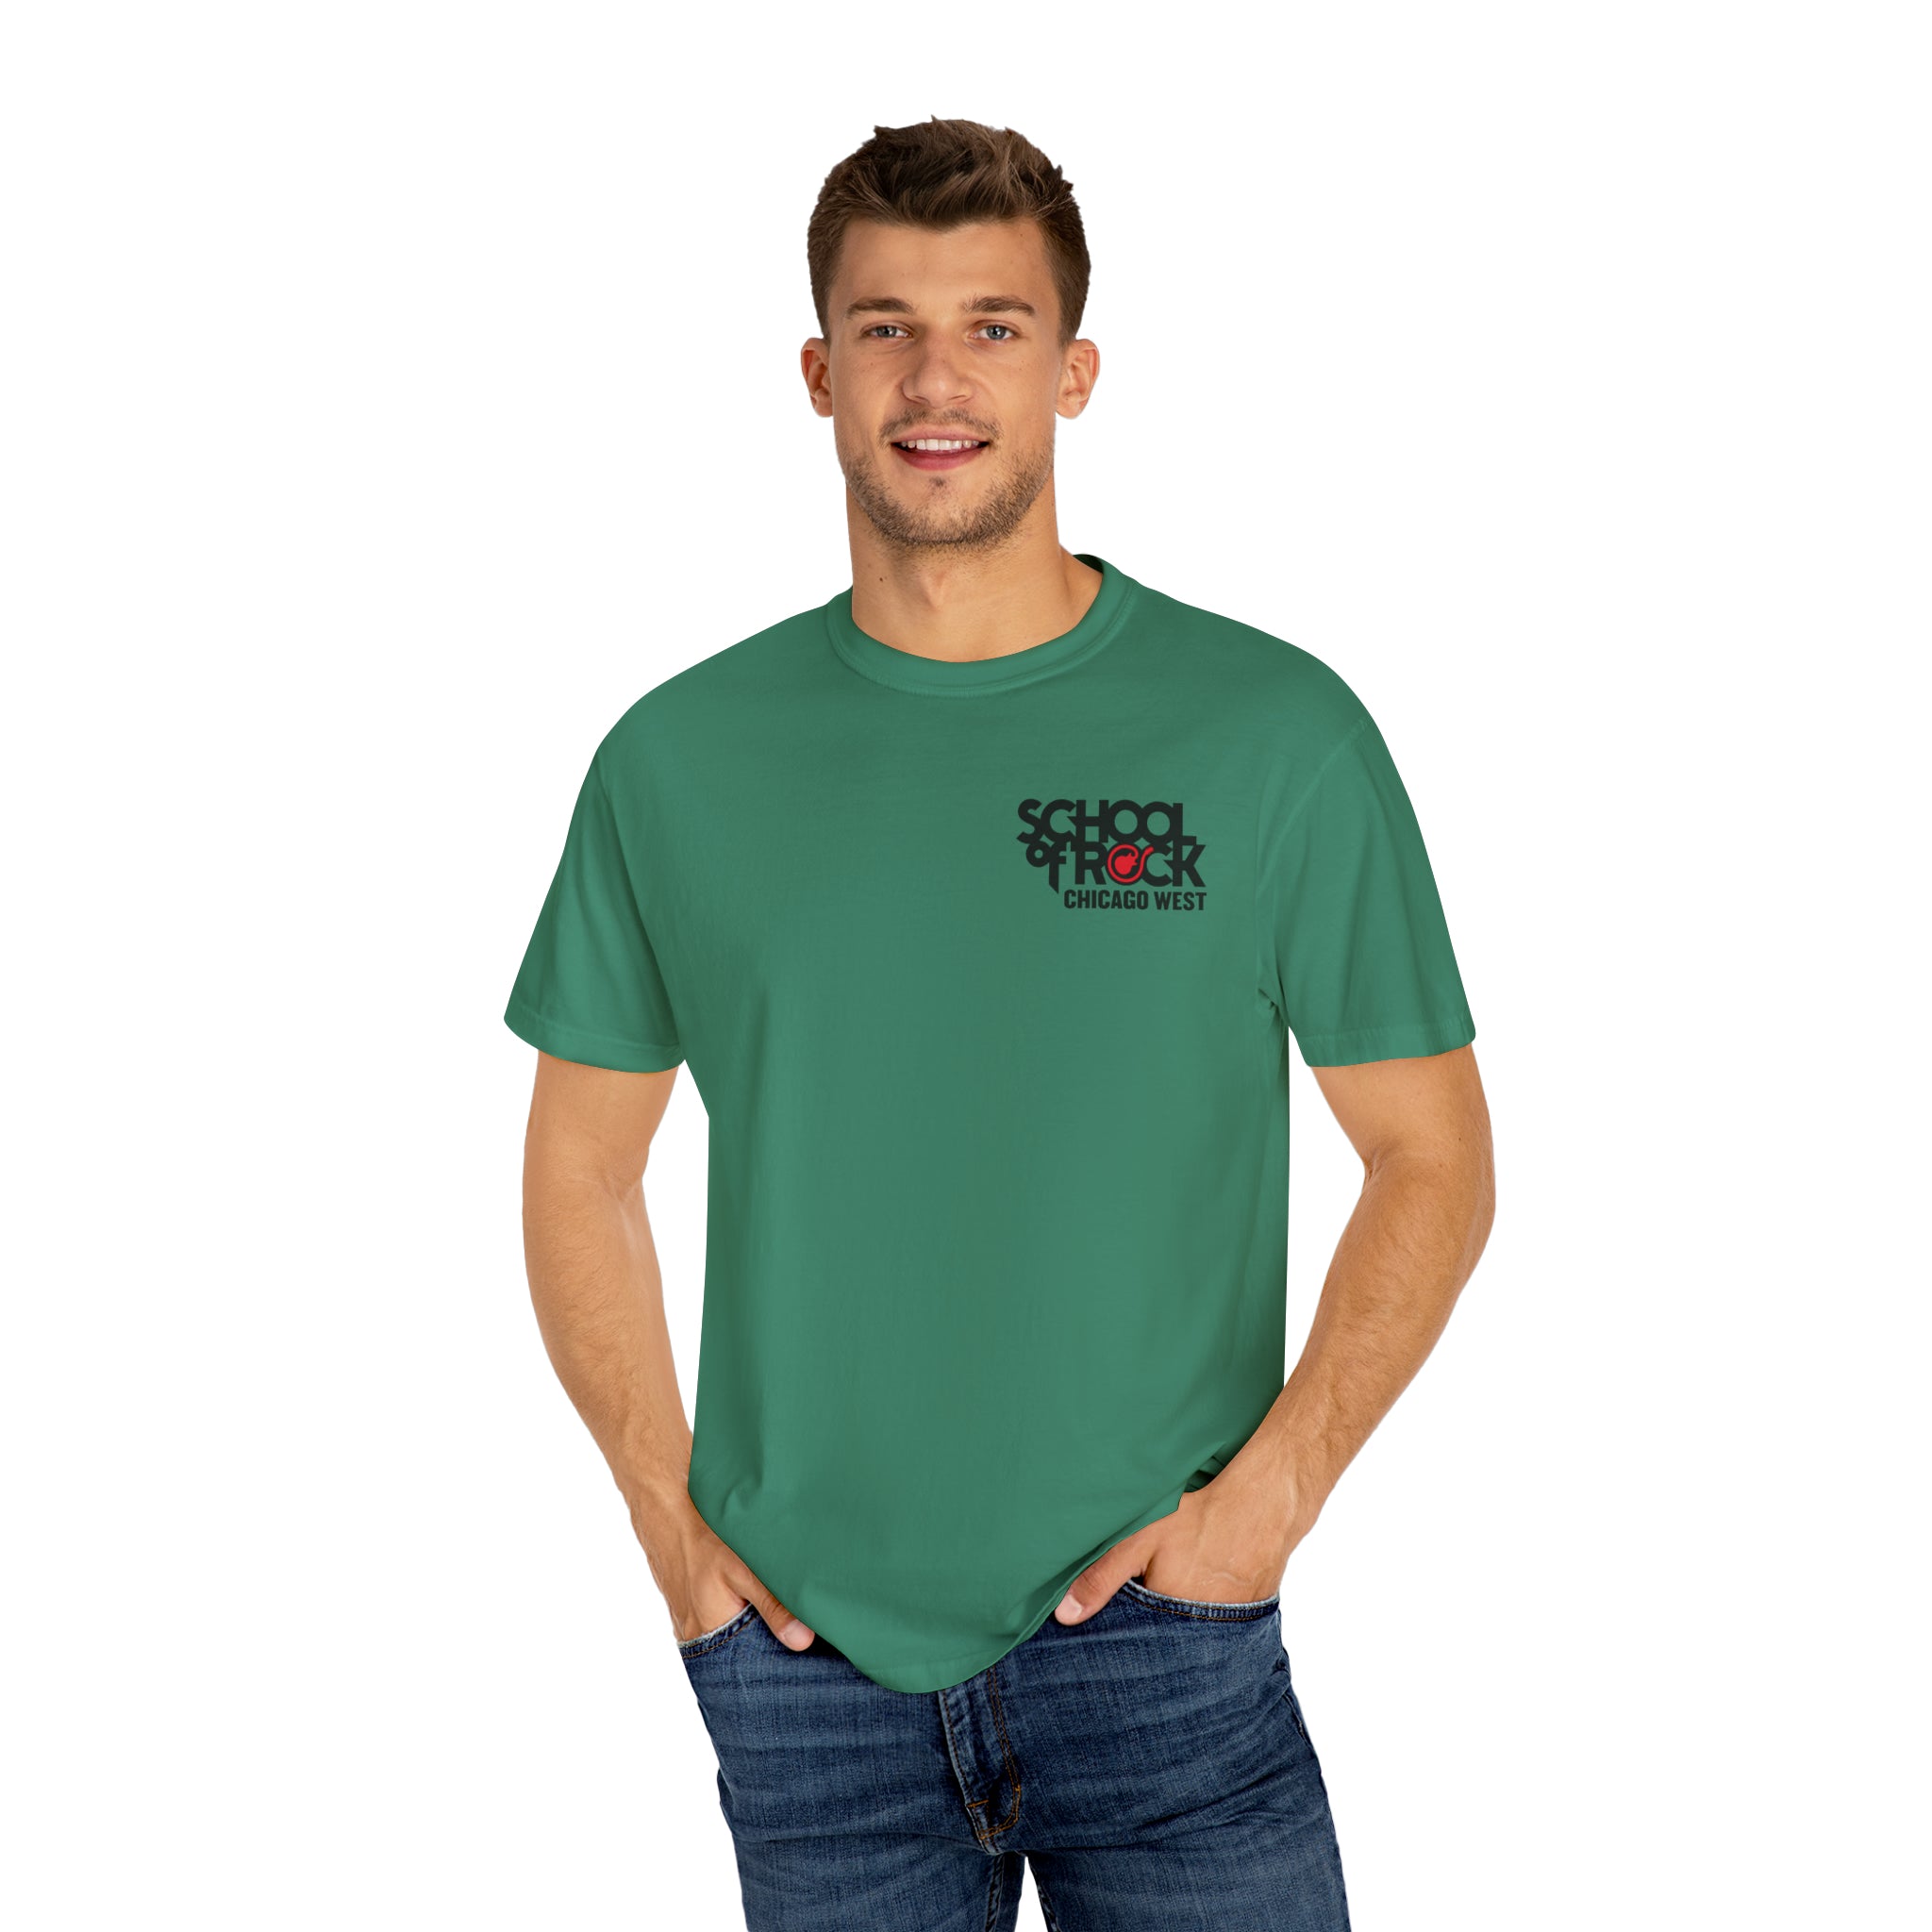 School of Rock Chicago West Comfort Colors Garment Dyed T-shirt